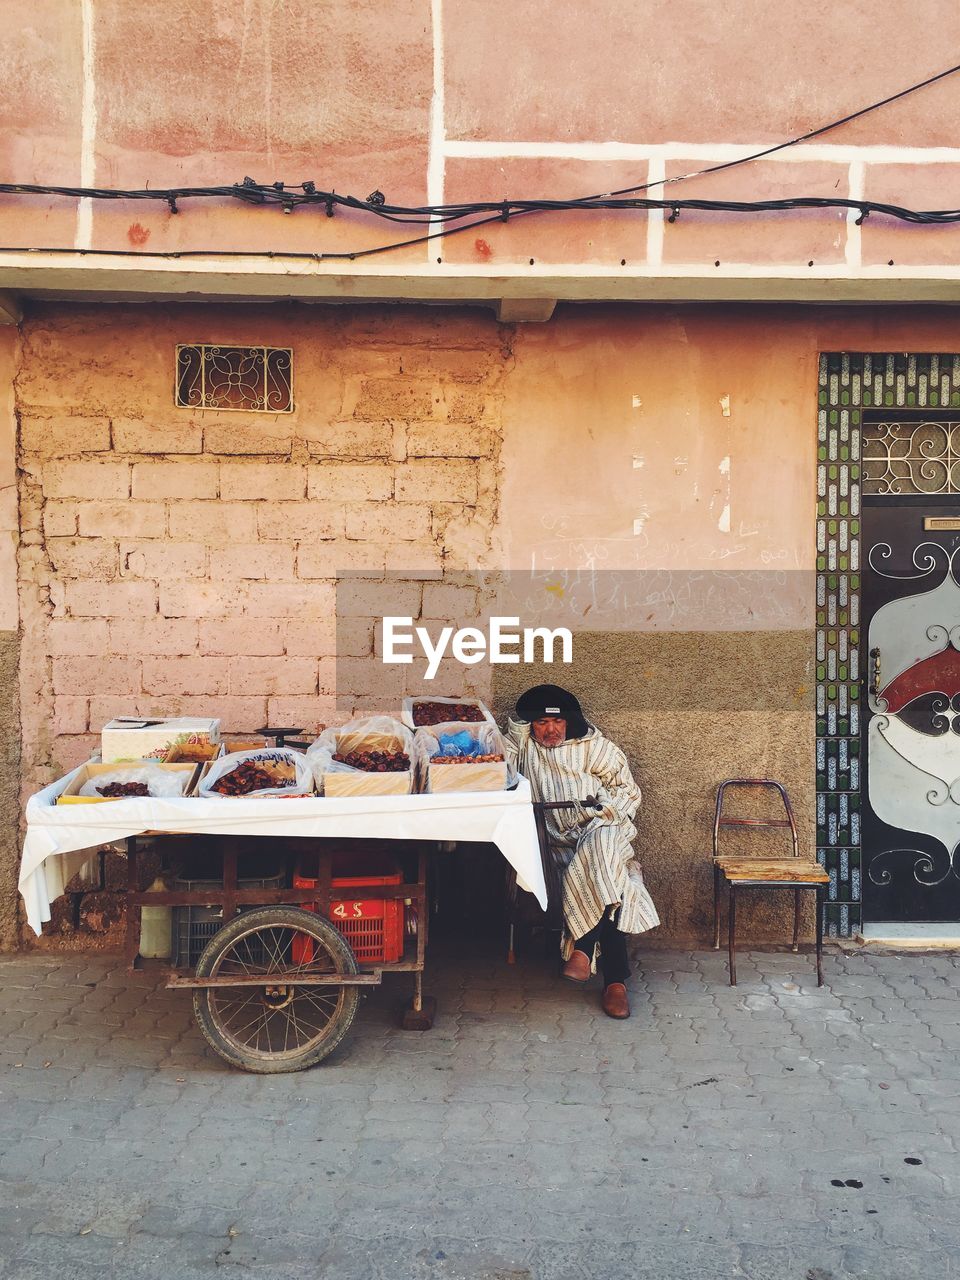 Man selling fruits in front of building